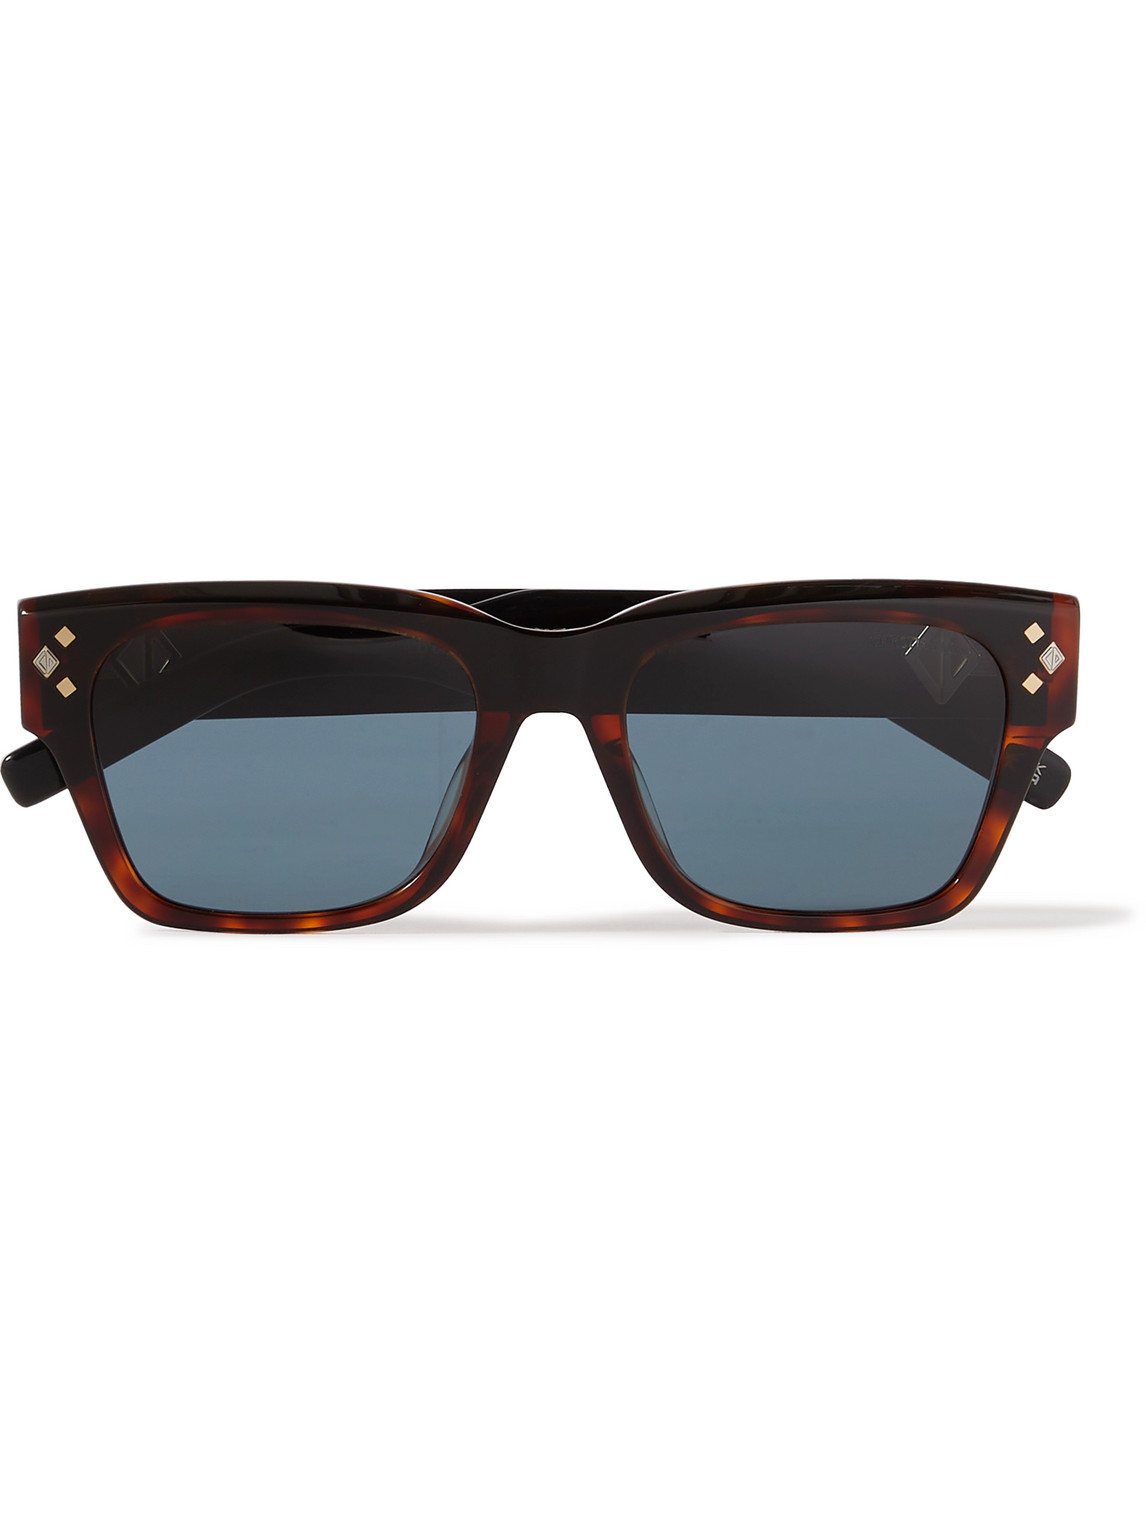 Dior Cd Diamond S21 D-frame Tortoiseshell Acetate And Silver-tone Sunglasses In Brown